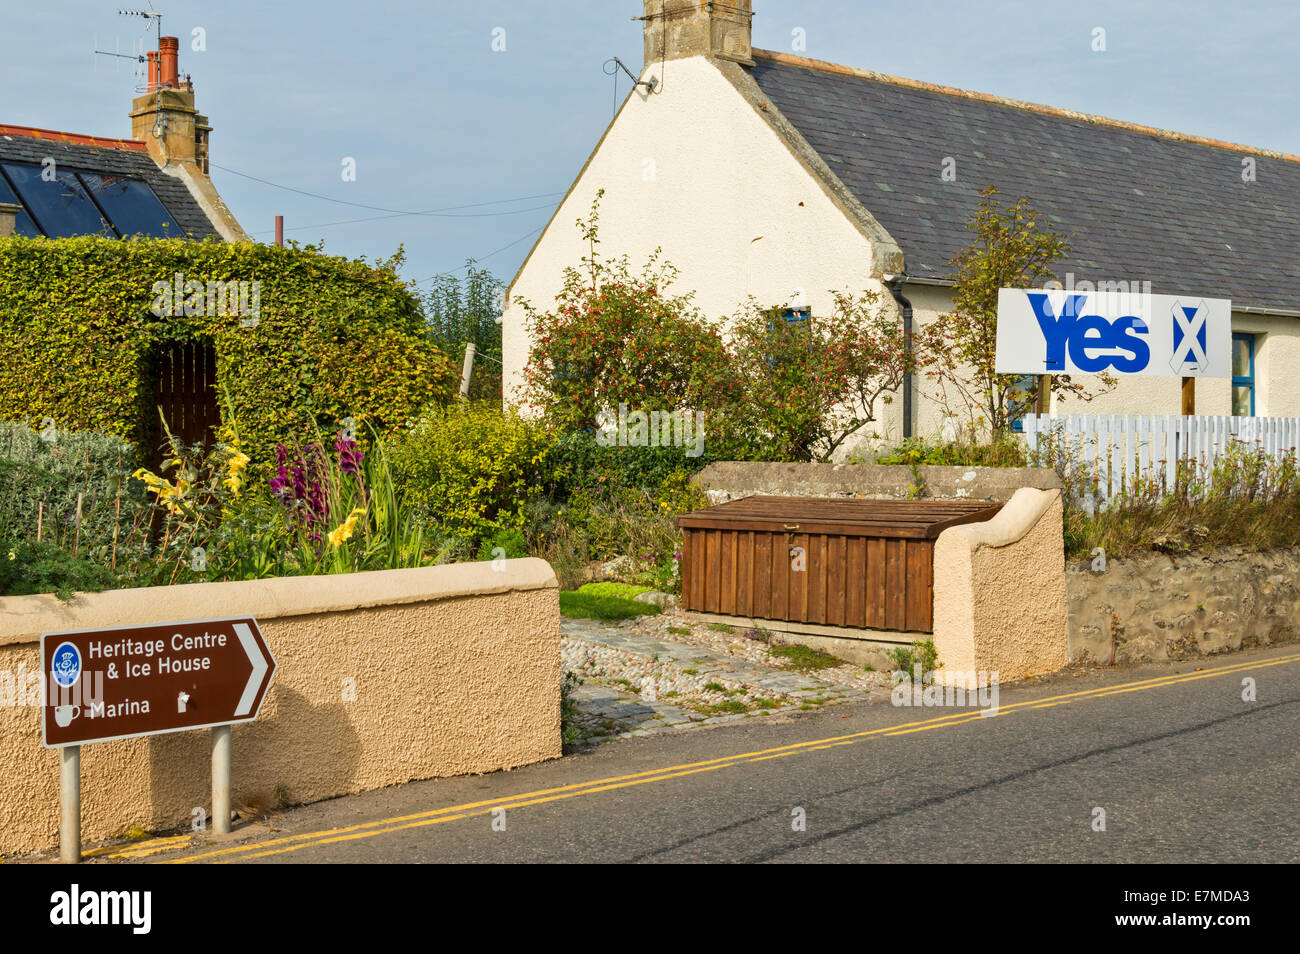 FINDHORN VILLAGE NEAR FORRES SCOTLAND HOUSE WITH LARGE VOTE YES SIGN FOR SCOTTISH REFERENDUM 2014 Stock Photo